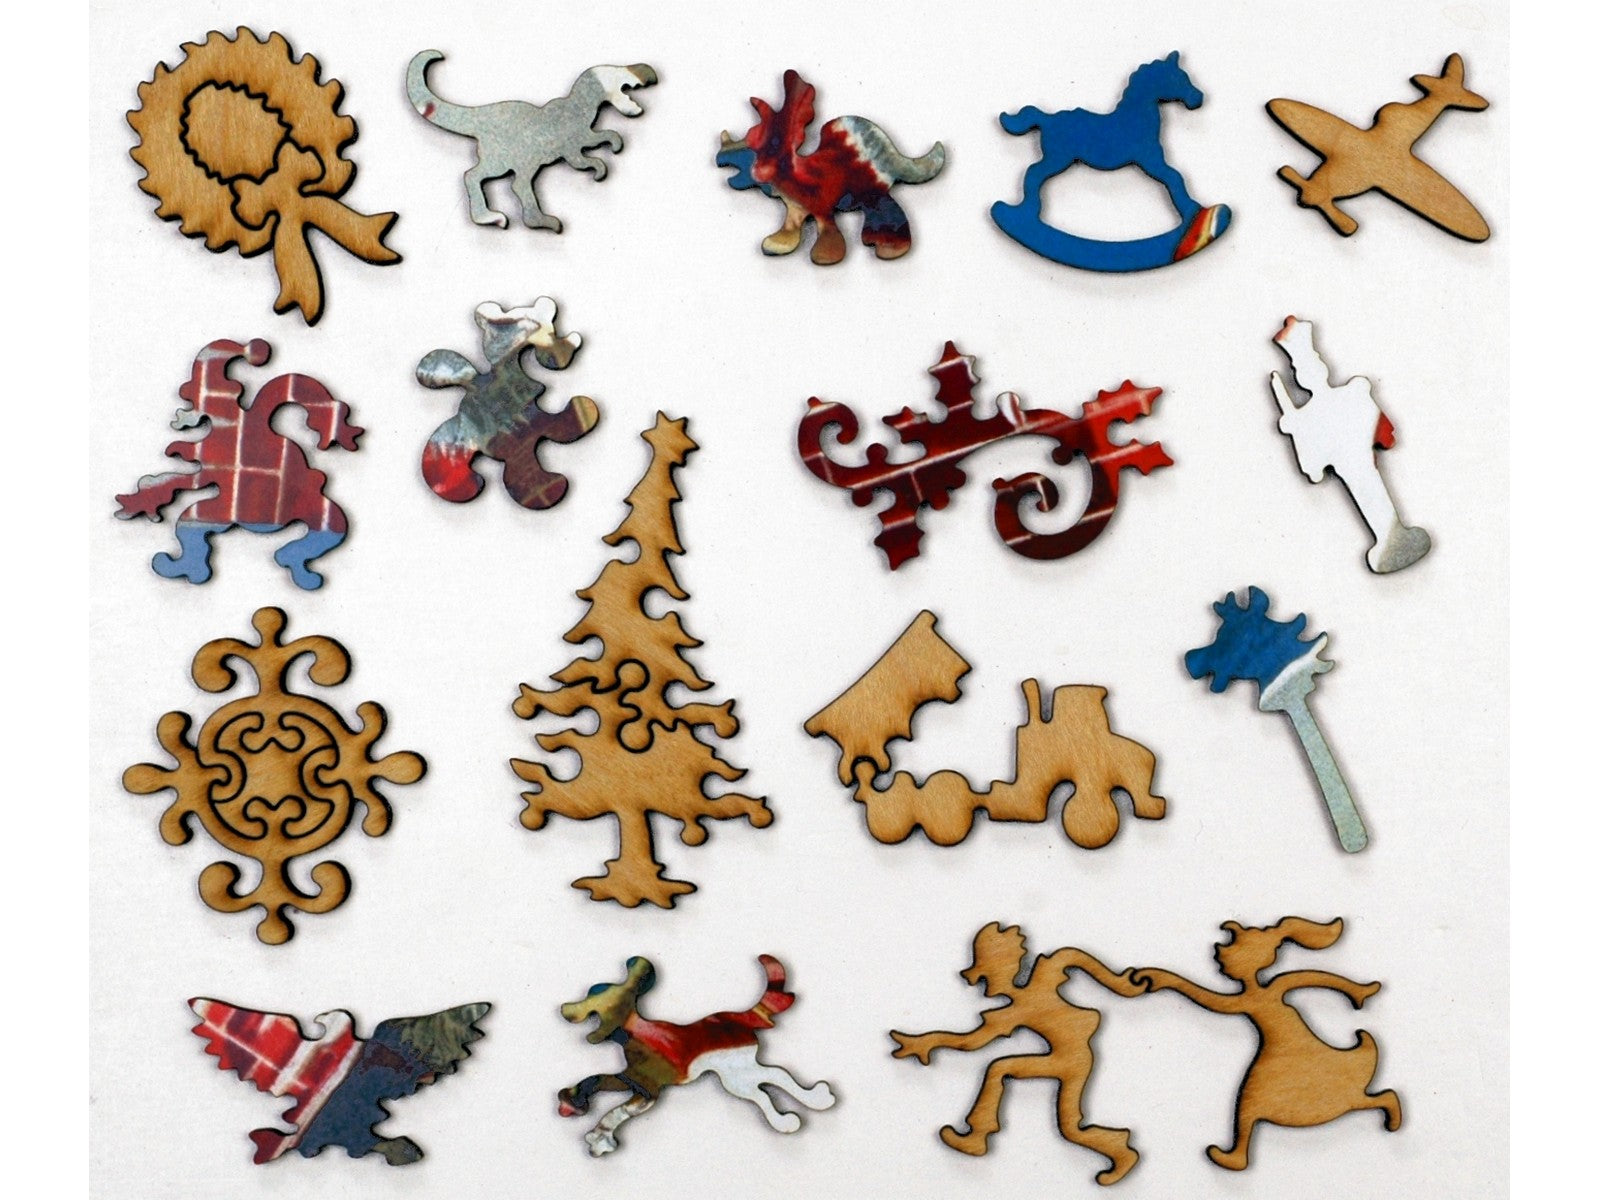 The whimsy pieces that can be found in the puzzle, Chimney Santa.